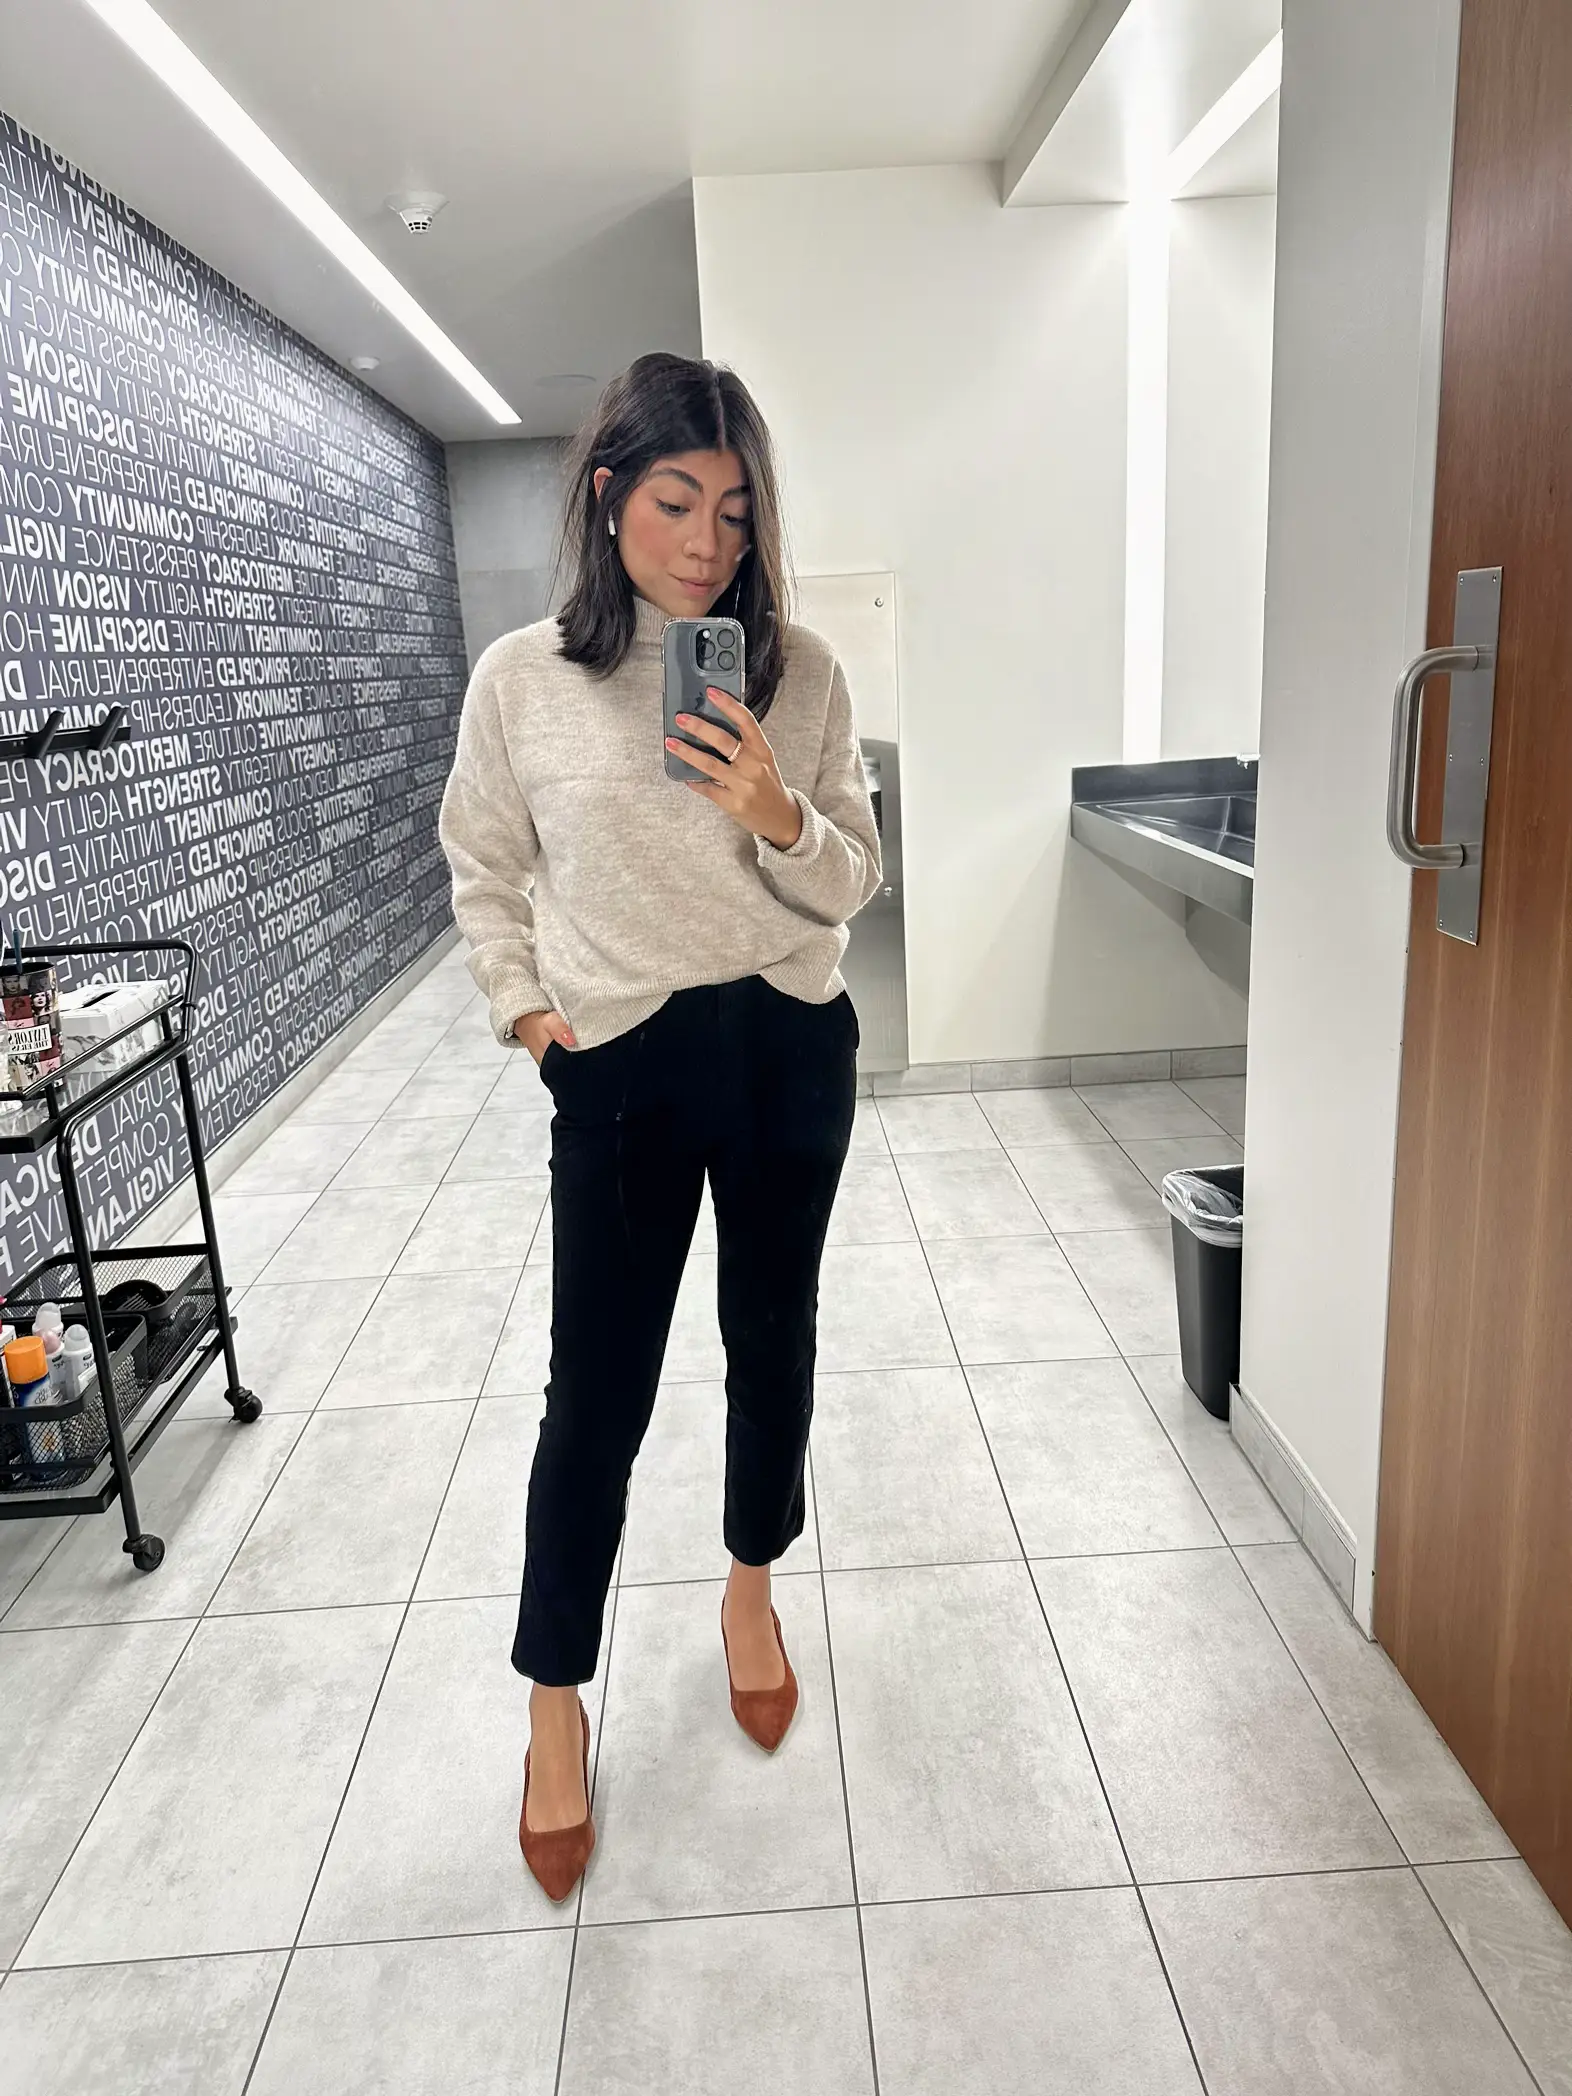 Charlotte 🕊 on Instagram: “Bringing back the smart/casual look